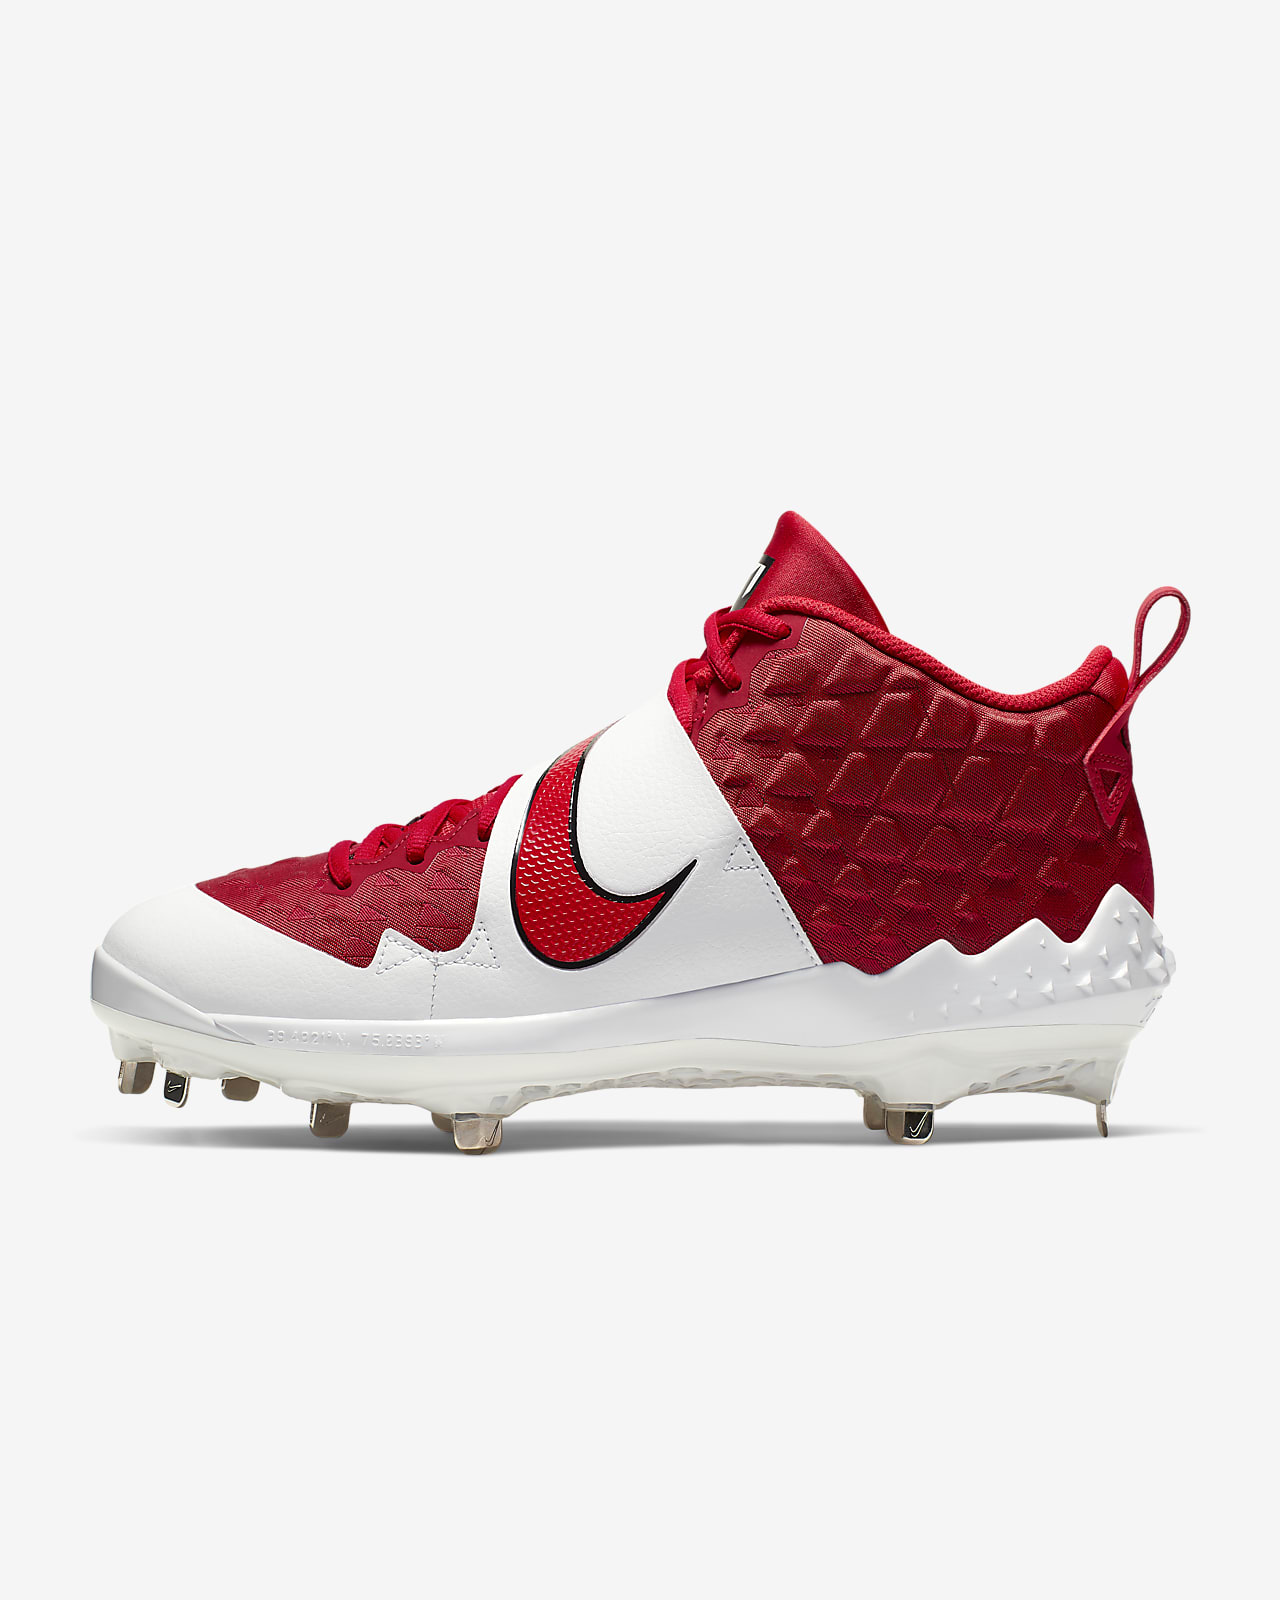 spikes nike trout